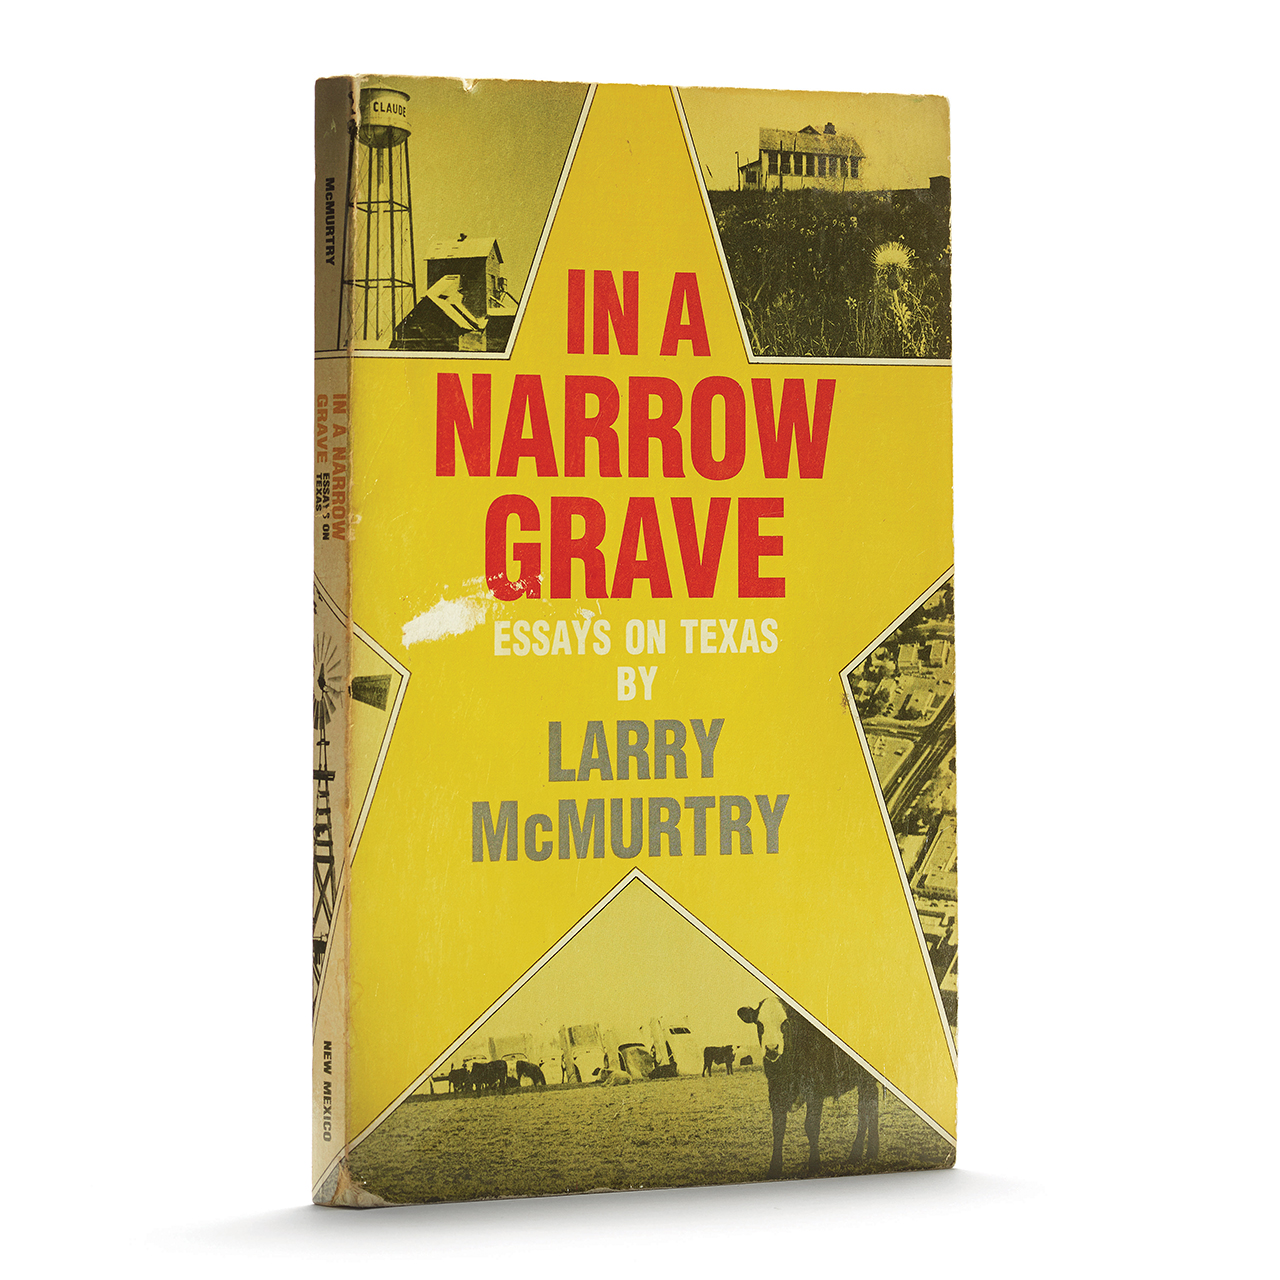 In a Narrow Grave by Larry McMurtry